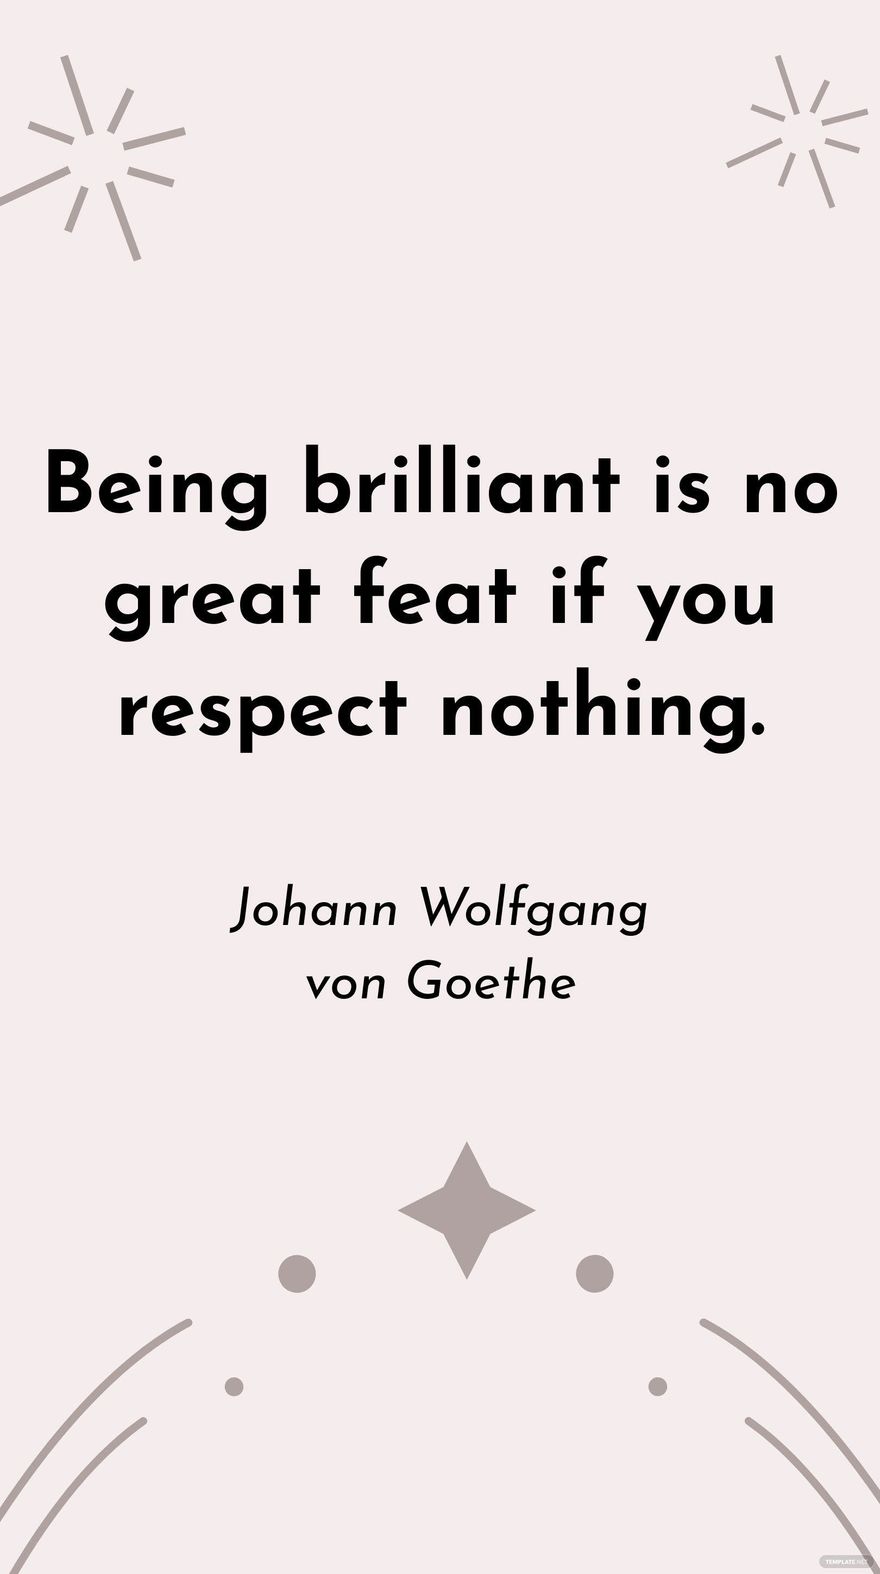 Johann Wolfgang von Goethe - Being brilliant is no great feat if you respect nothing.